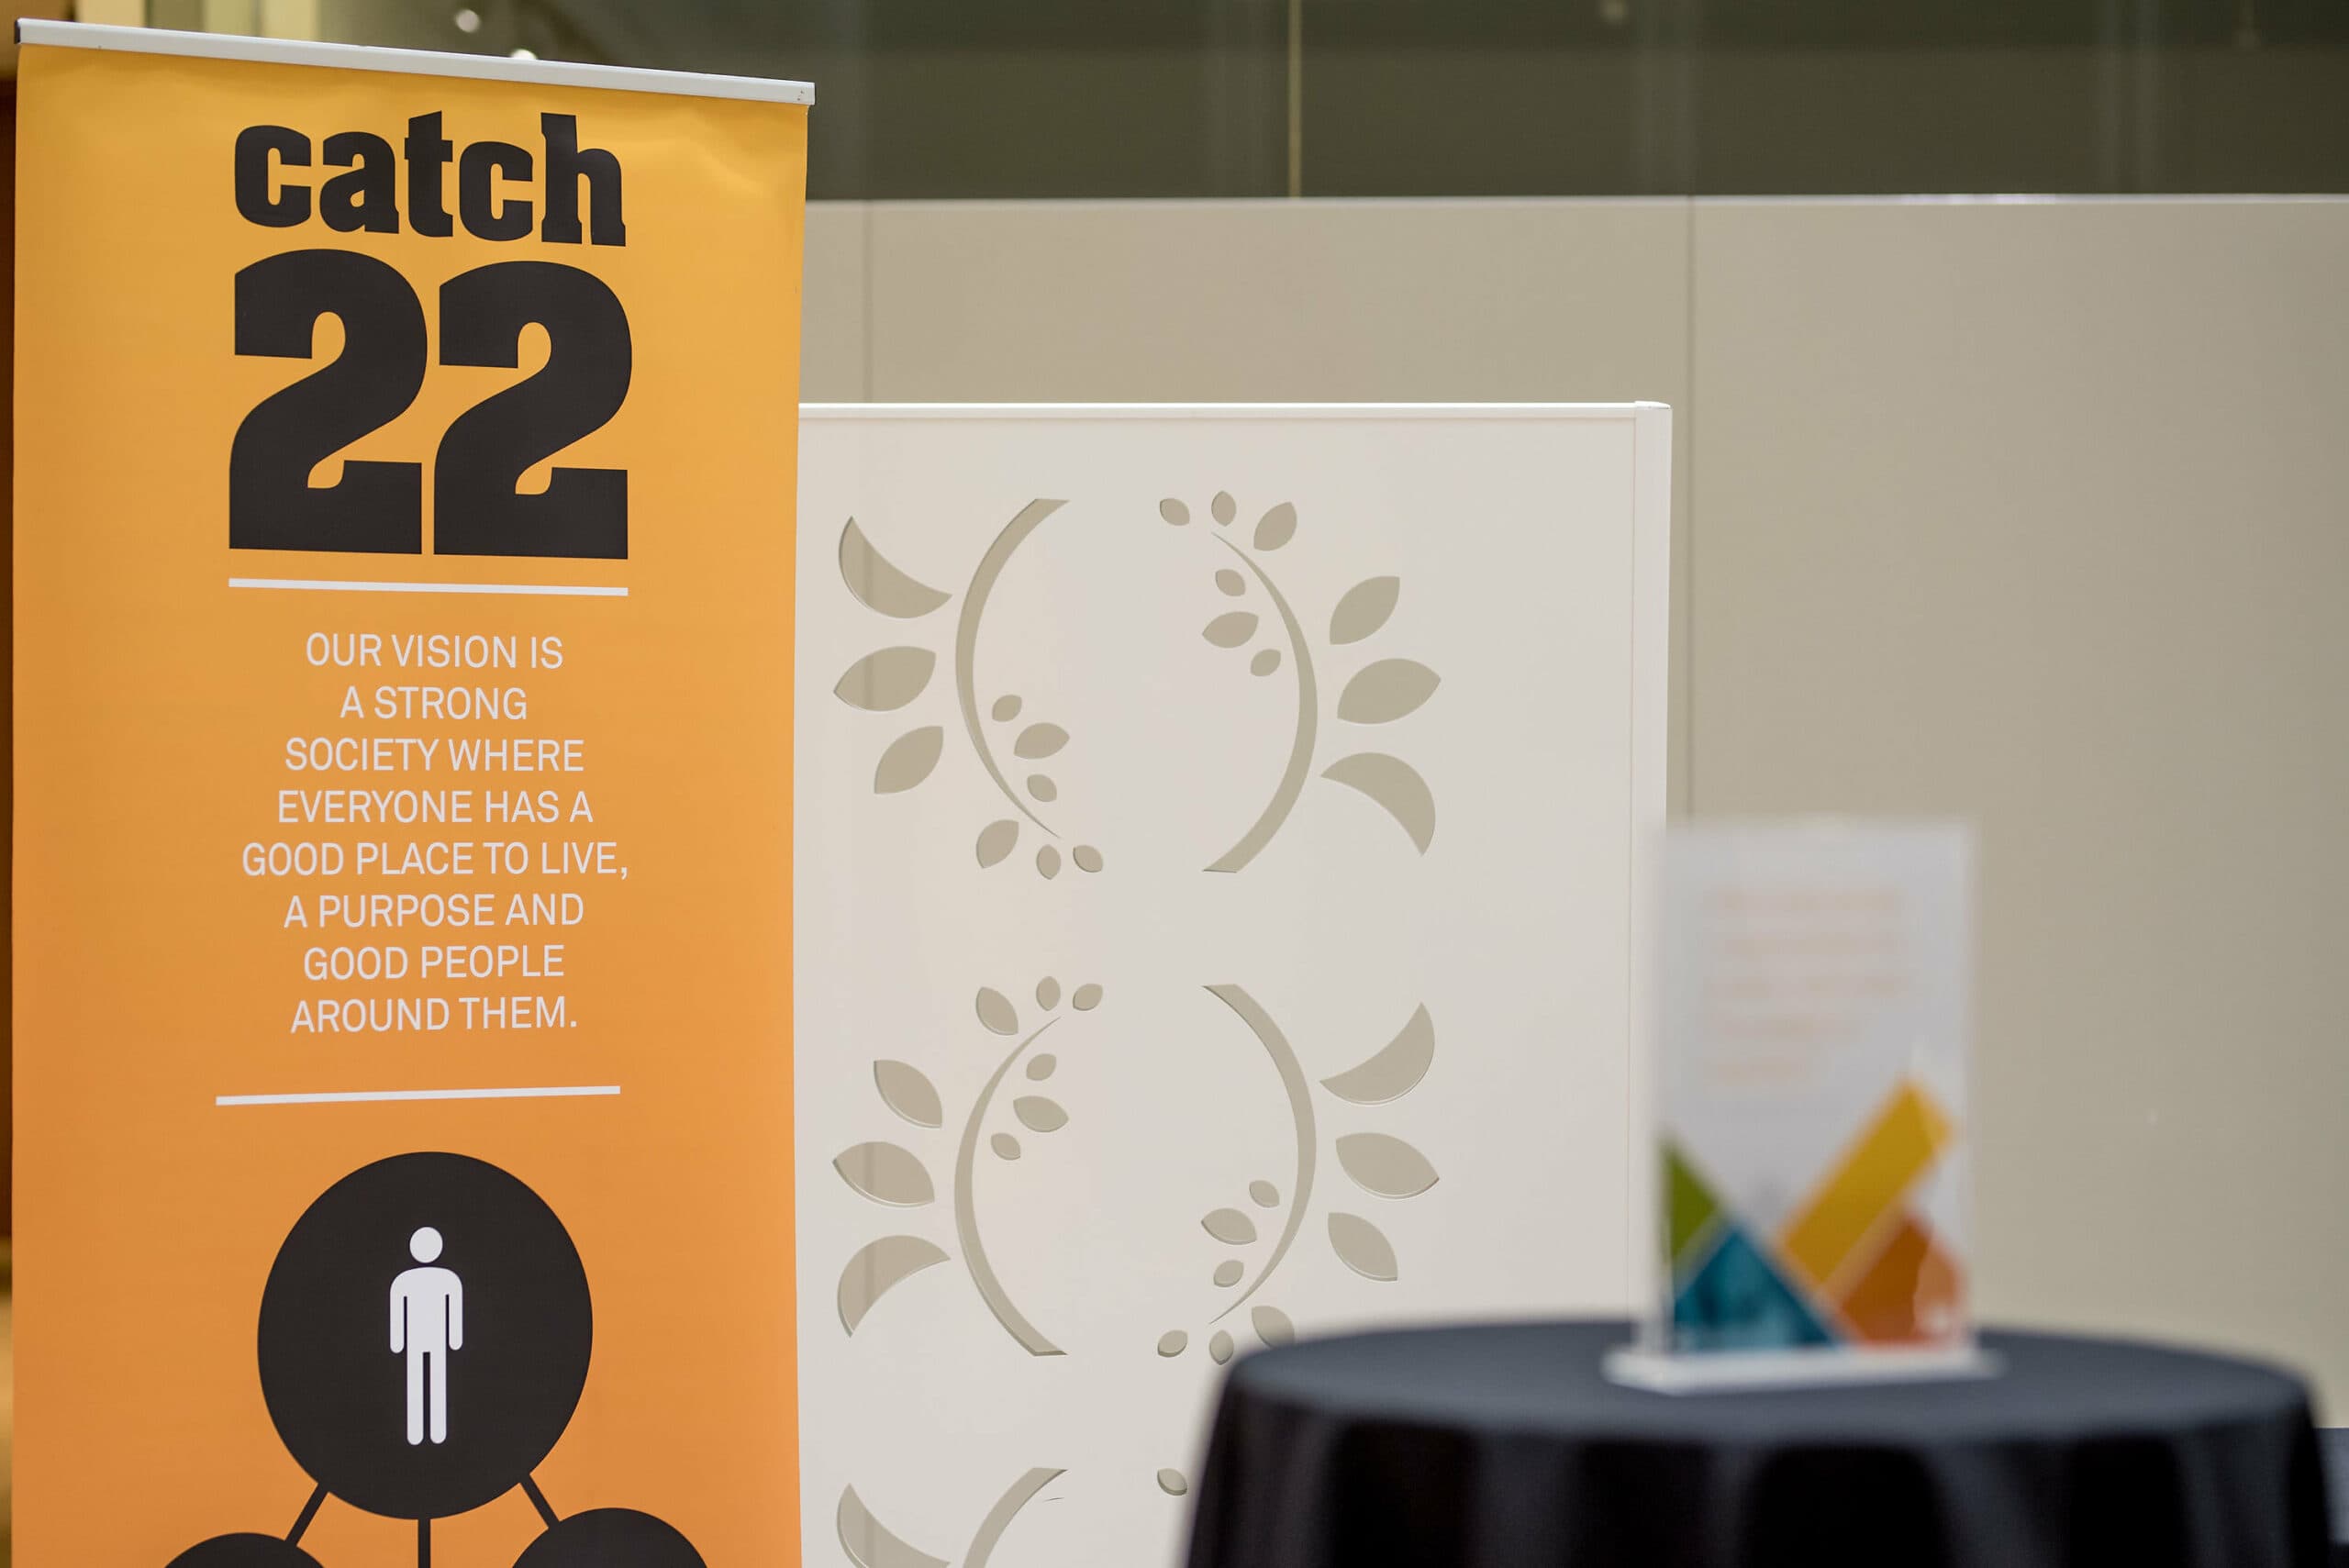 A yellow roll-up banner is set up at an event which reads "Catch22: Our vision is a strong society where everyone has a good place to live, a purpose, and good people around them."